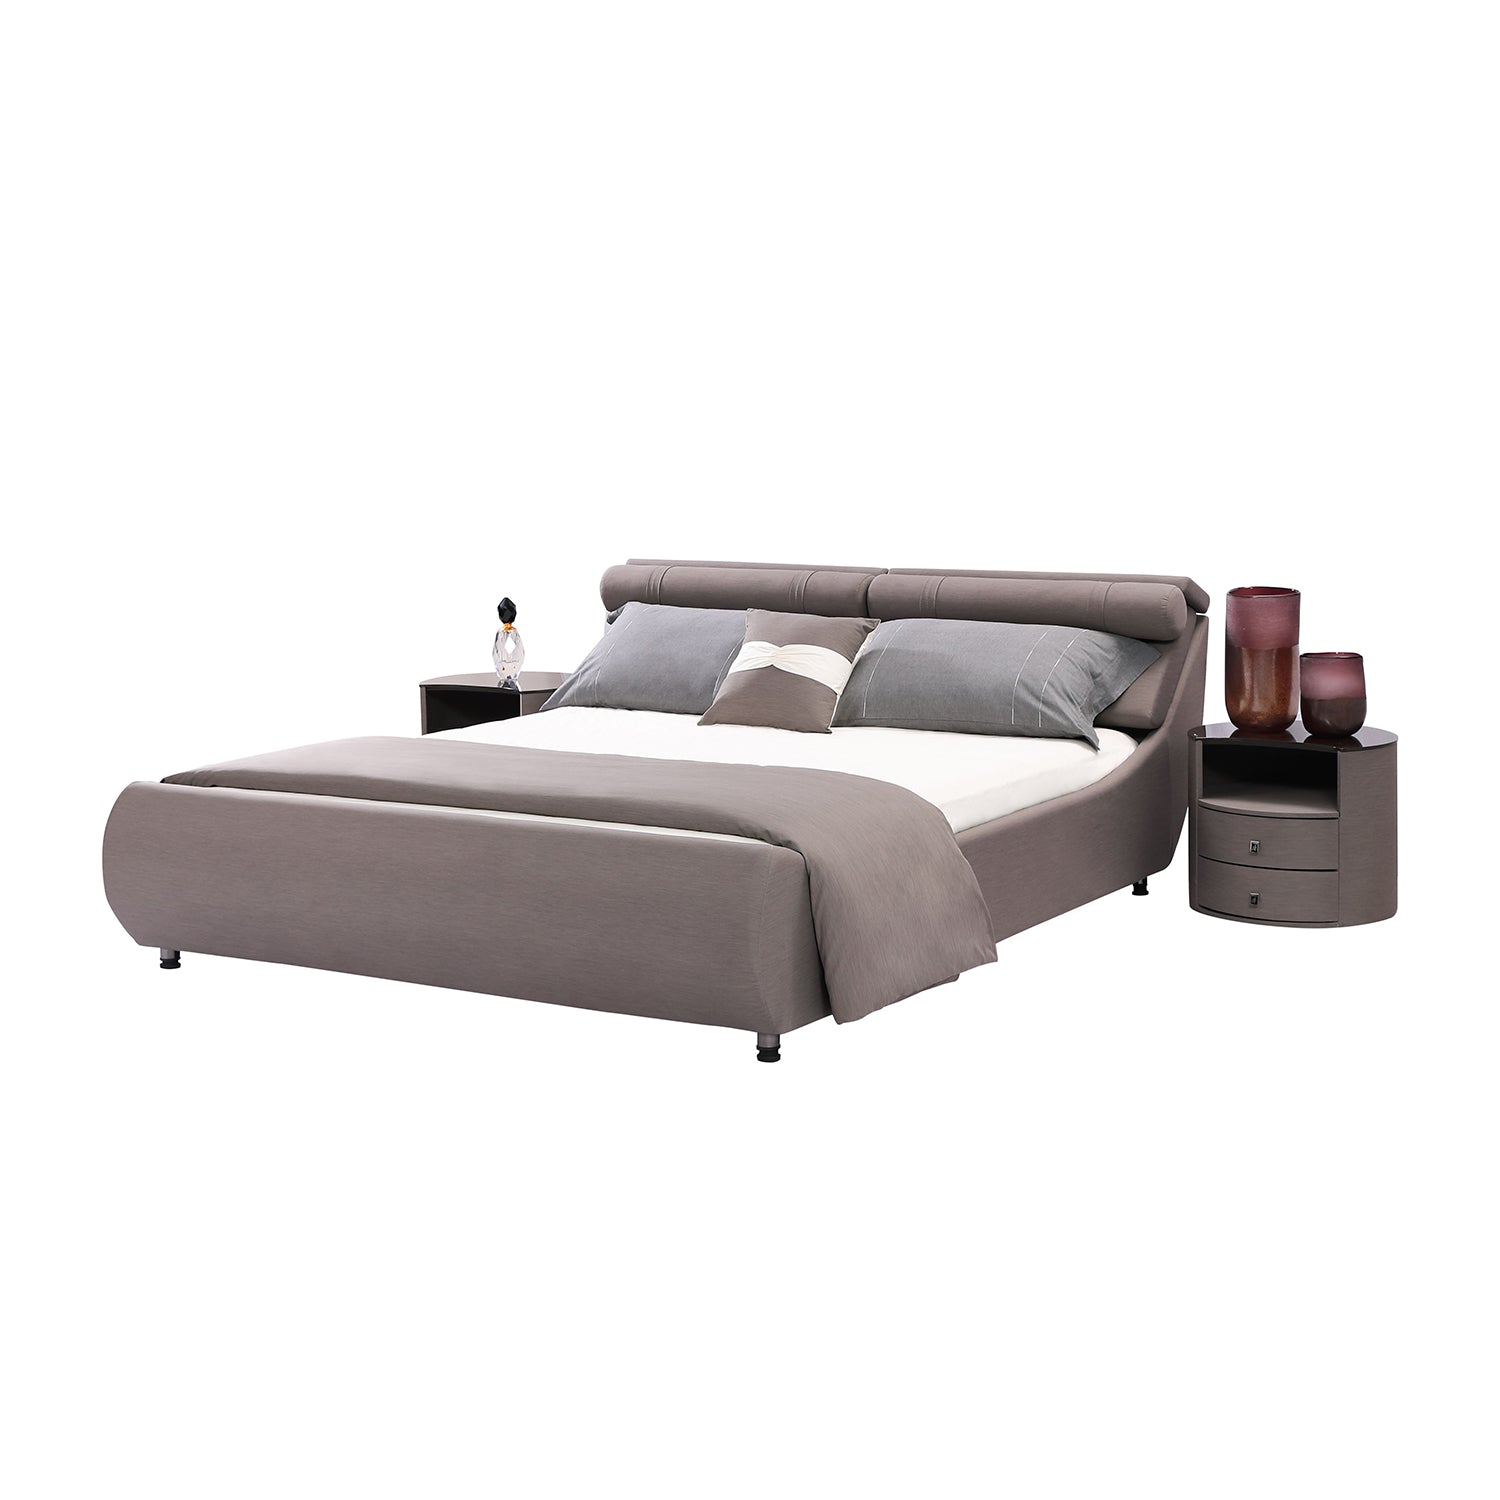 DeRUCCI Bed Frame BZZ4 - 093C in sleek grey fabric with grey and white bedding, complemented by rounded nightstands with modern lamps and vases.